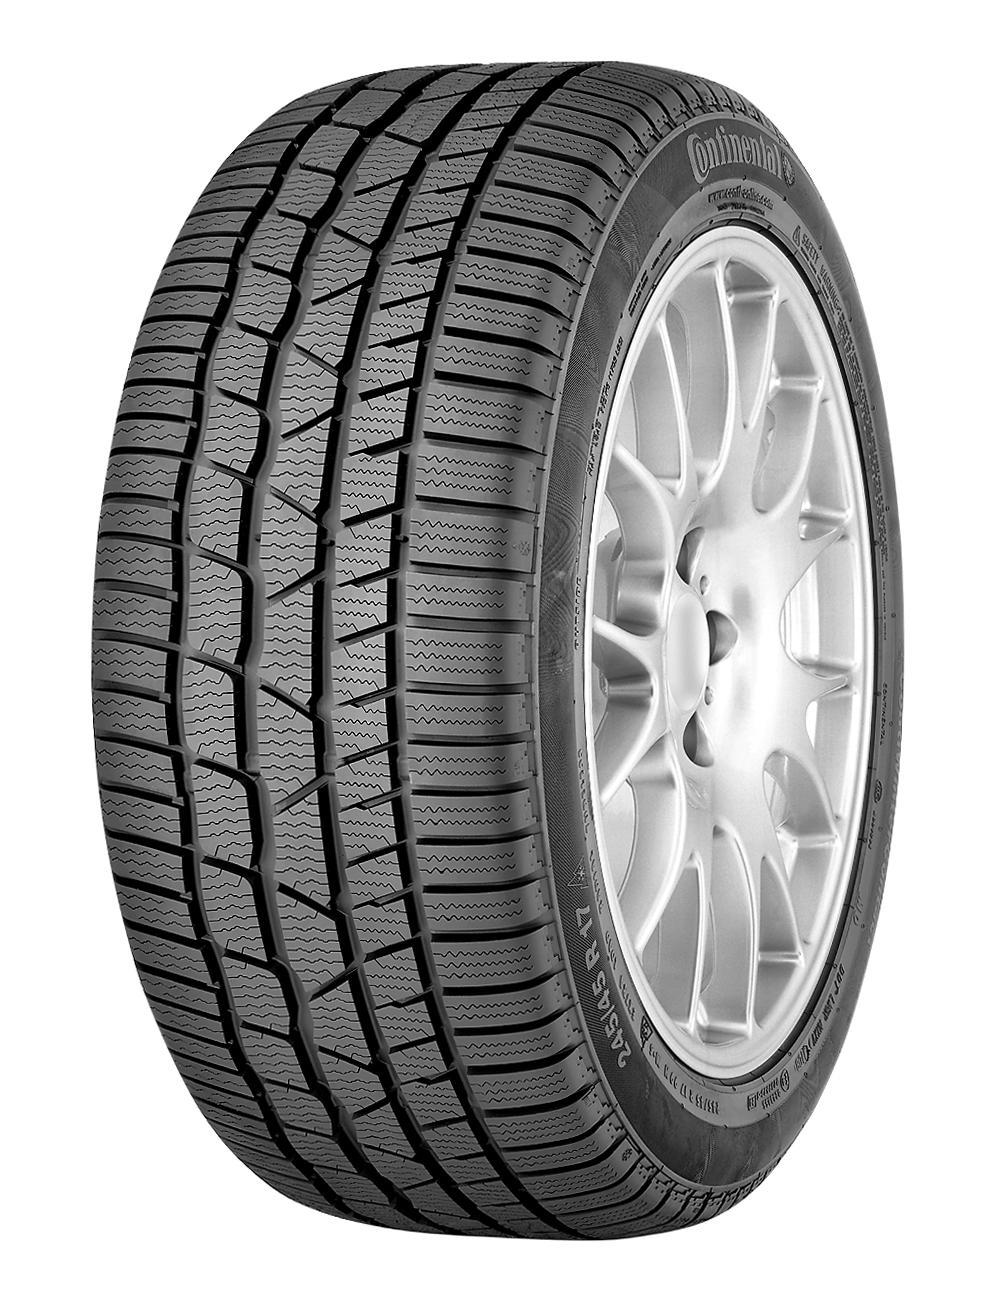 Anvelope iarna CONTINENTAL CONTI WINTER CONTACT TS830 P 225/45 R17 91H